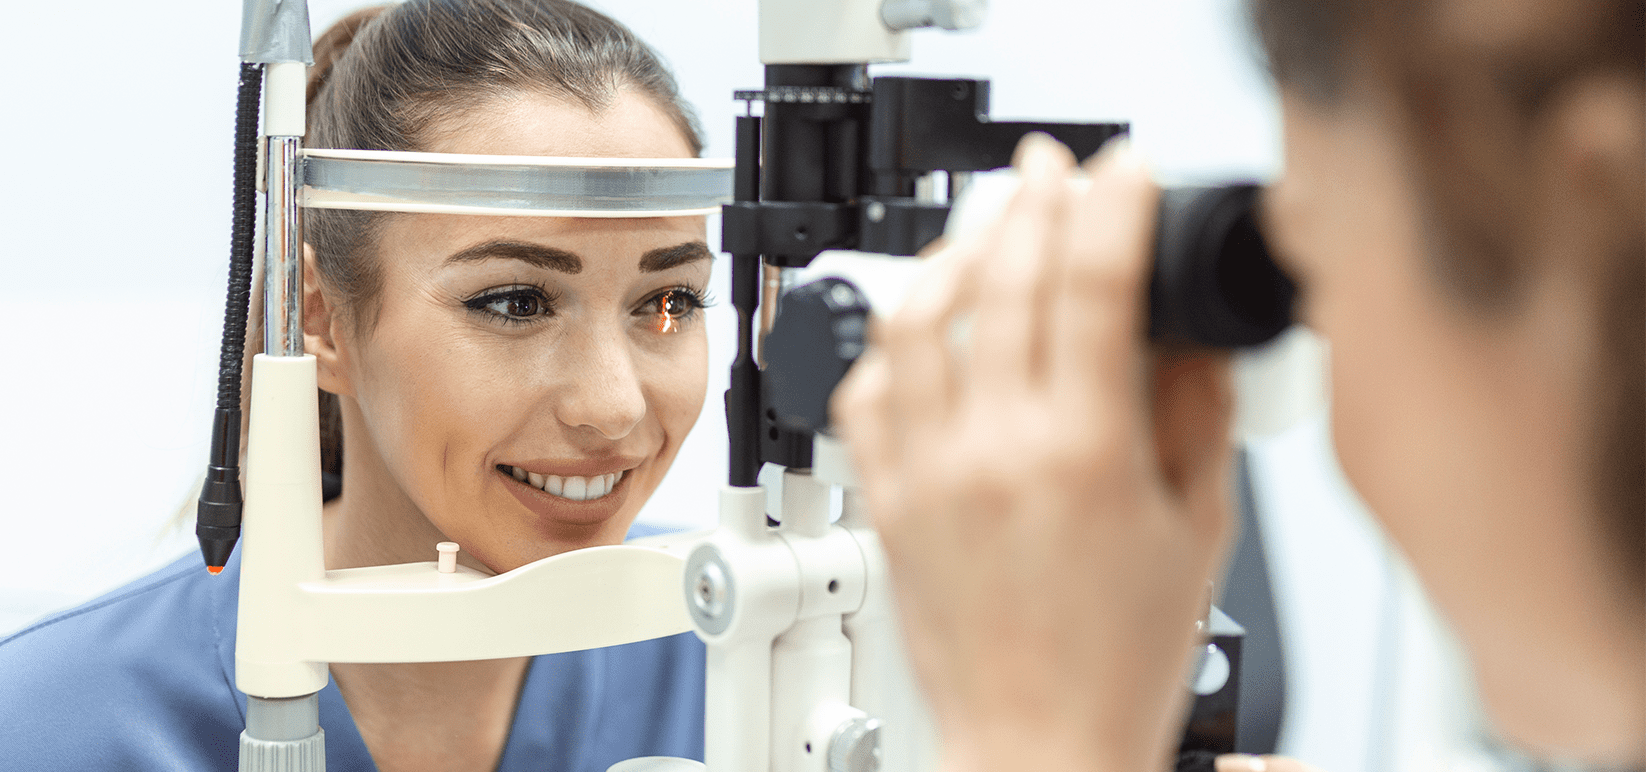 What Are the 3 Types of Eye Doctors?